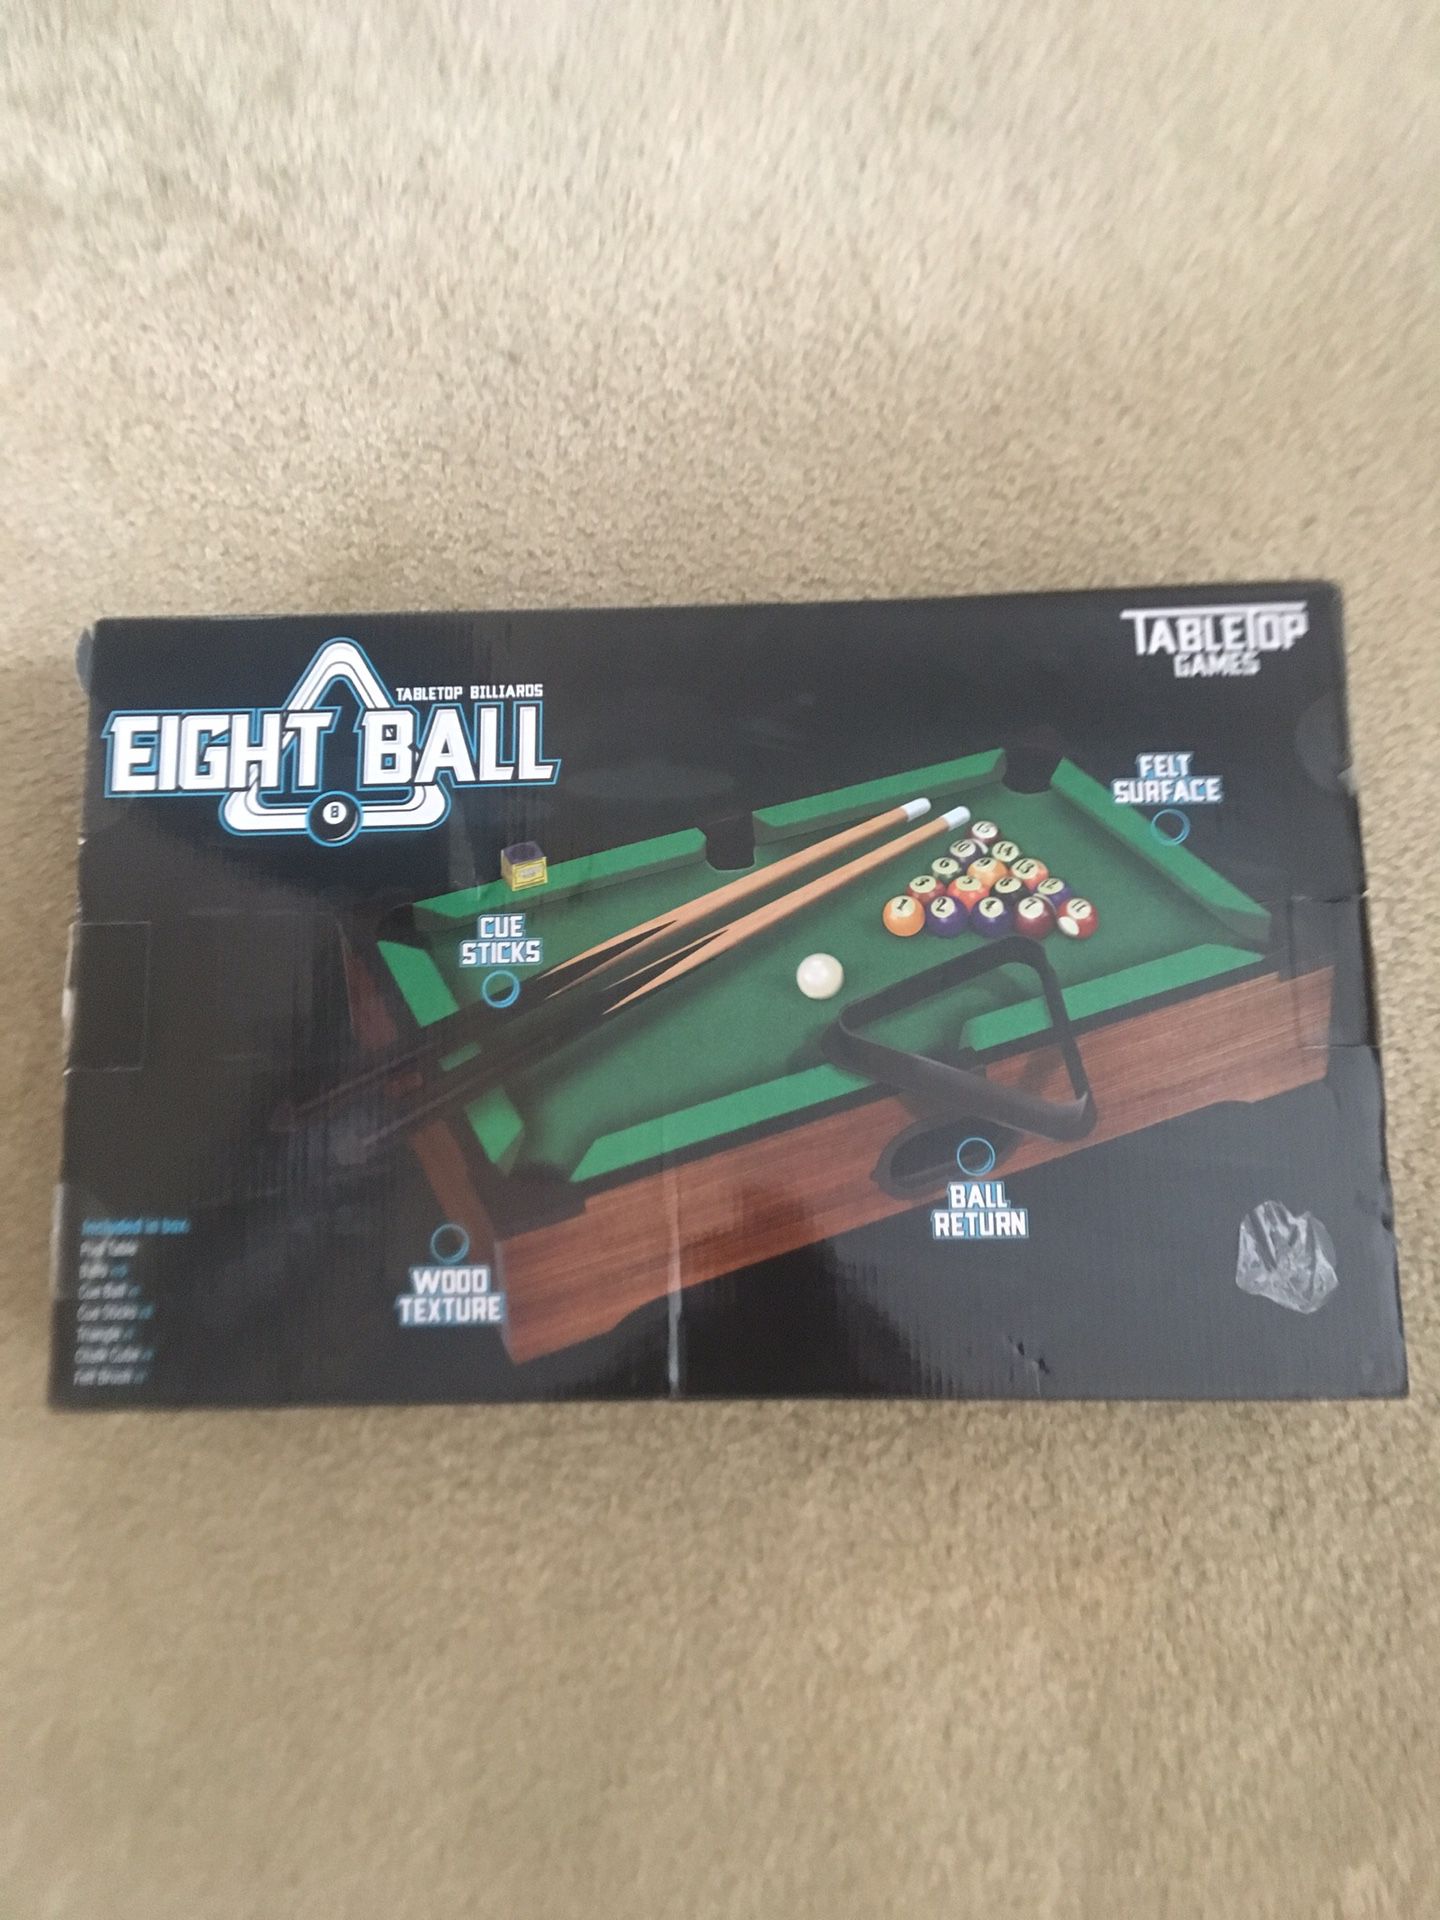 Table top pool table game